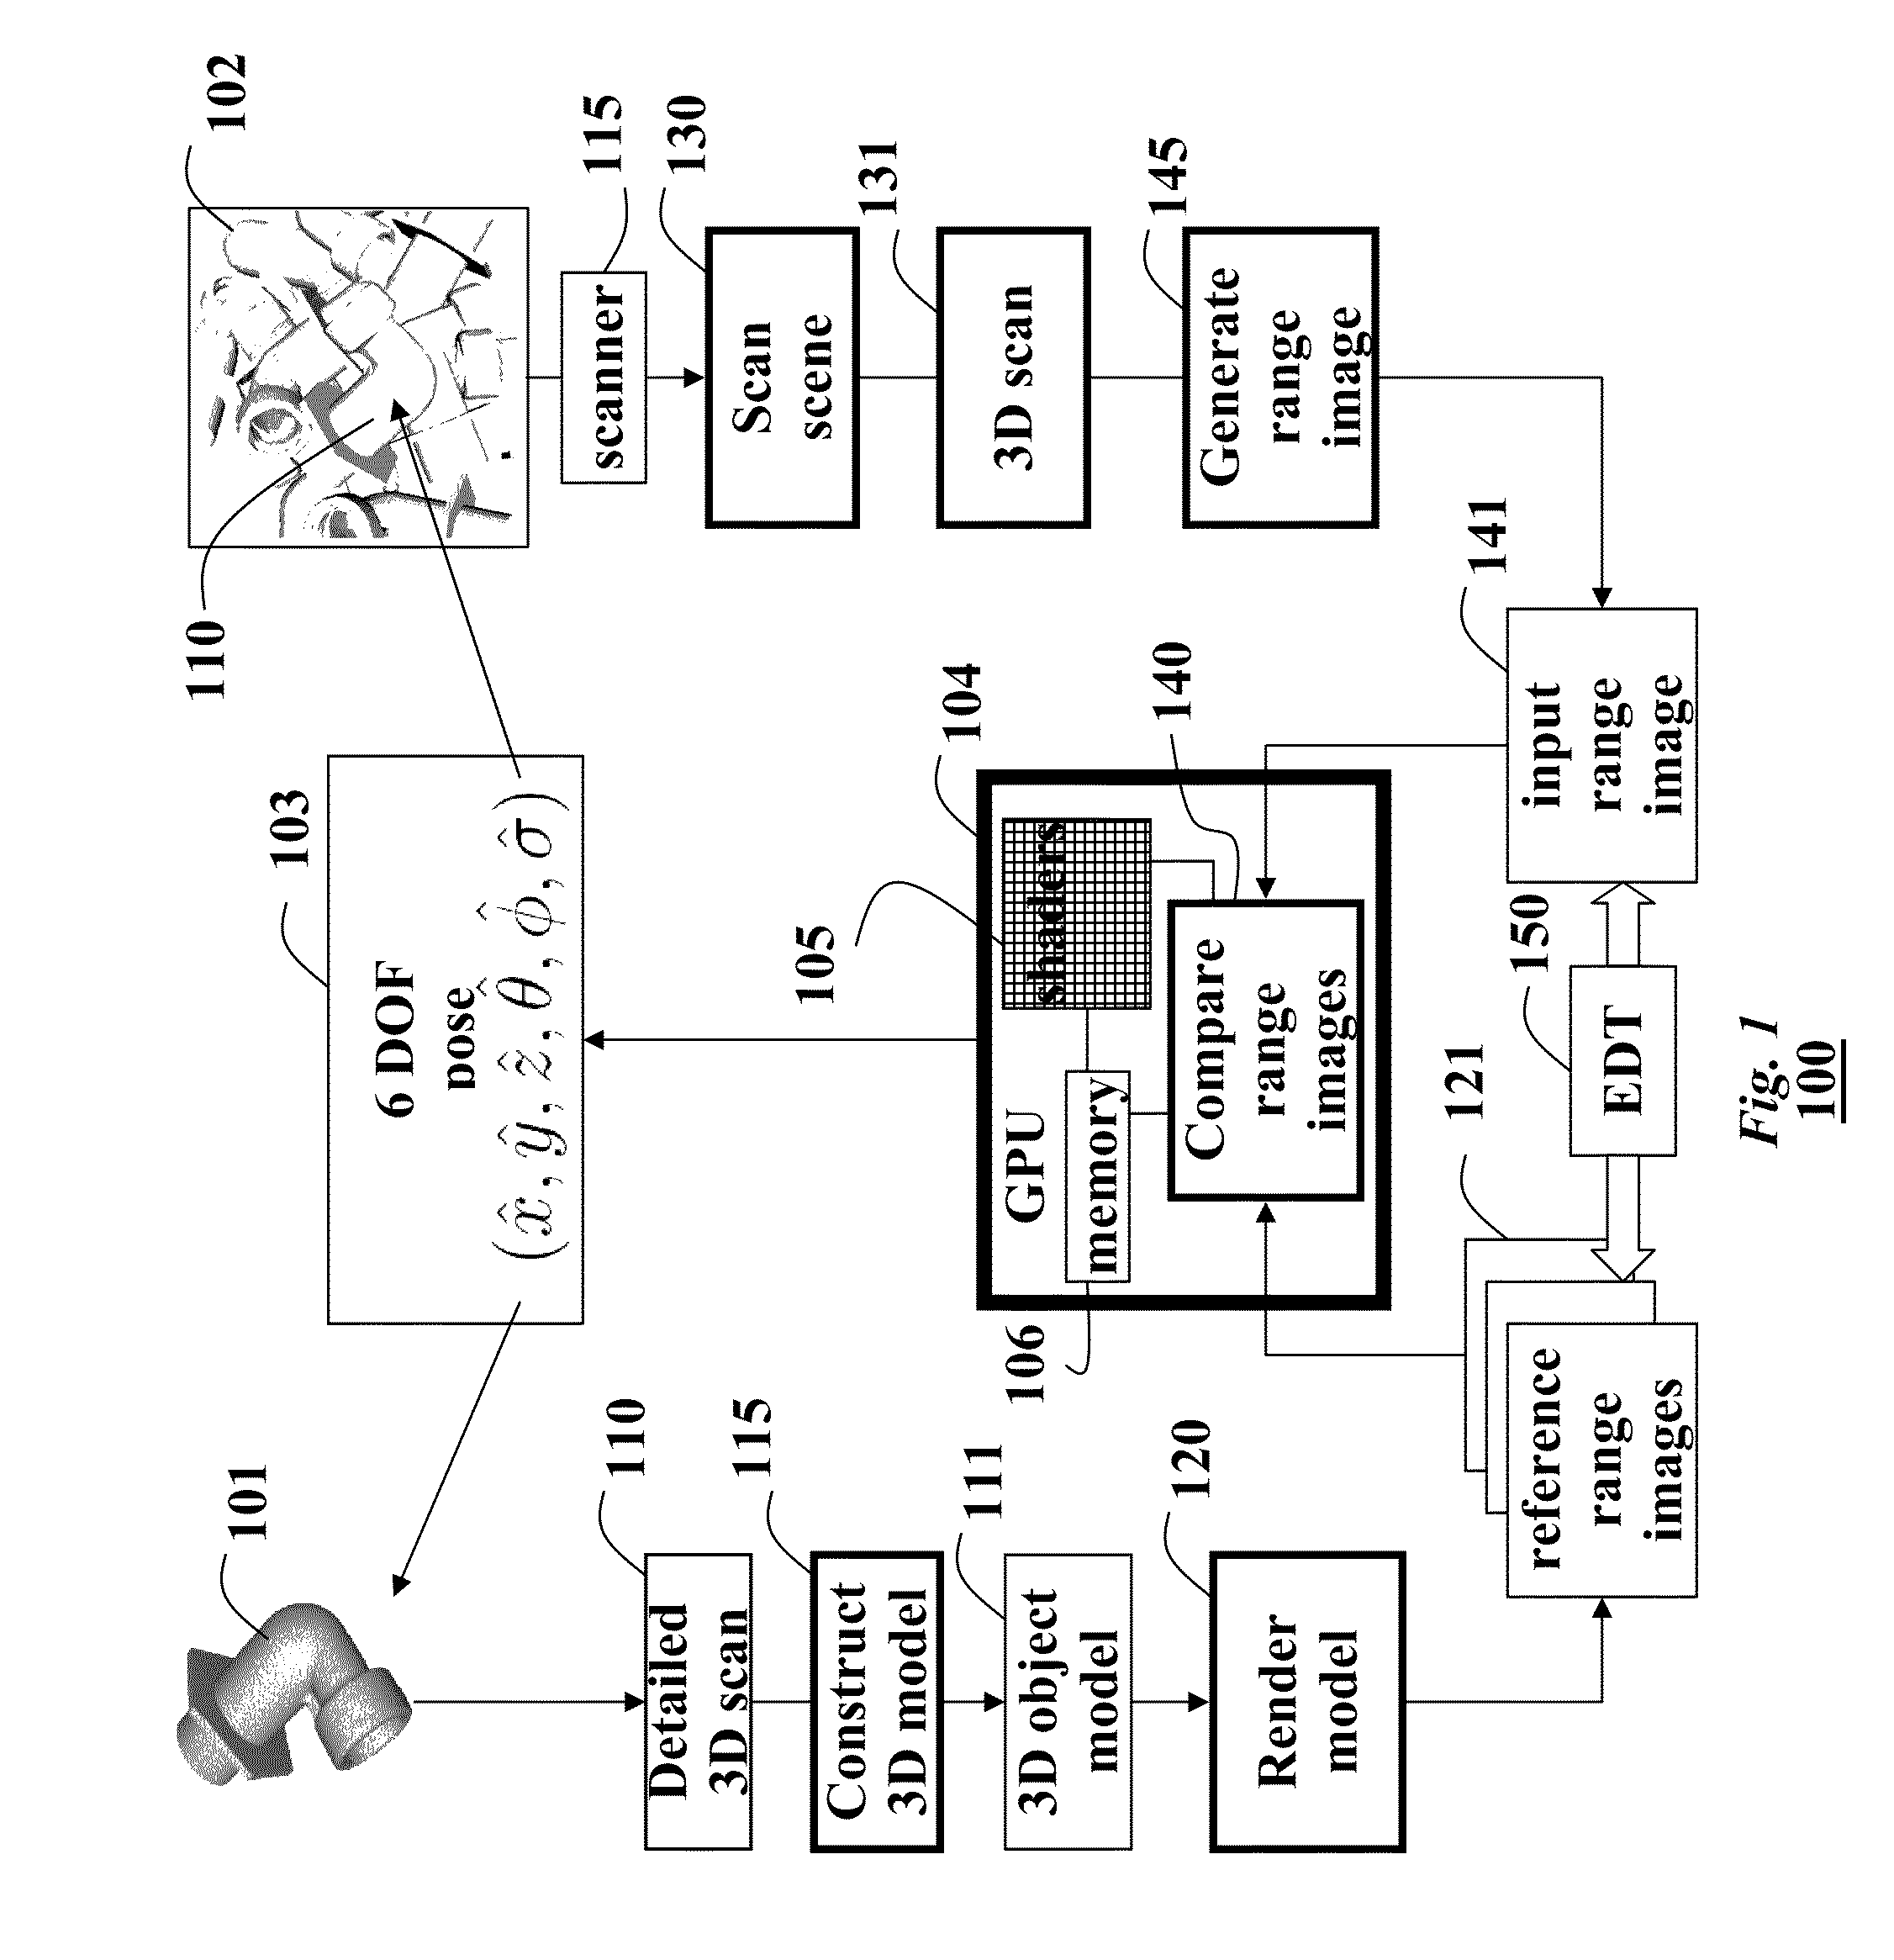 Method and system for determining objects poses from range images